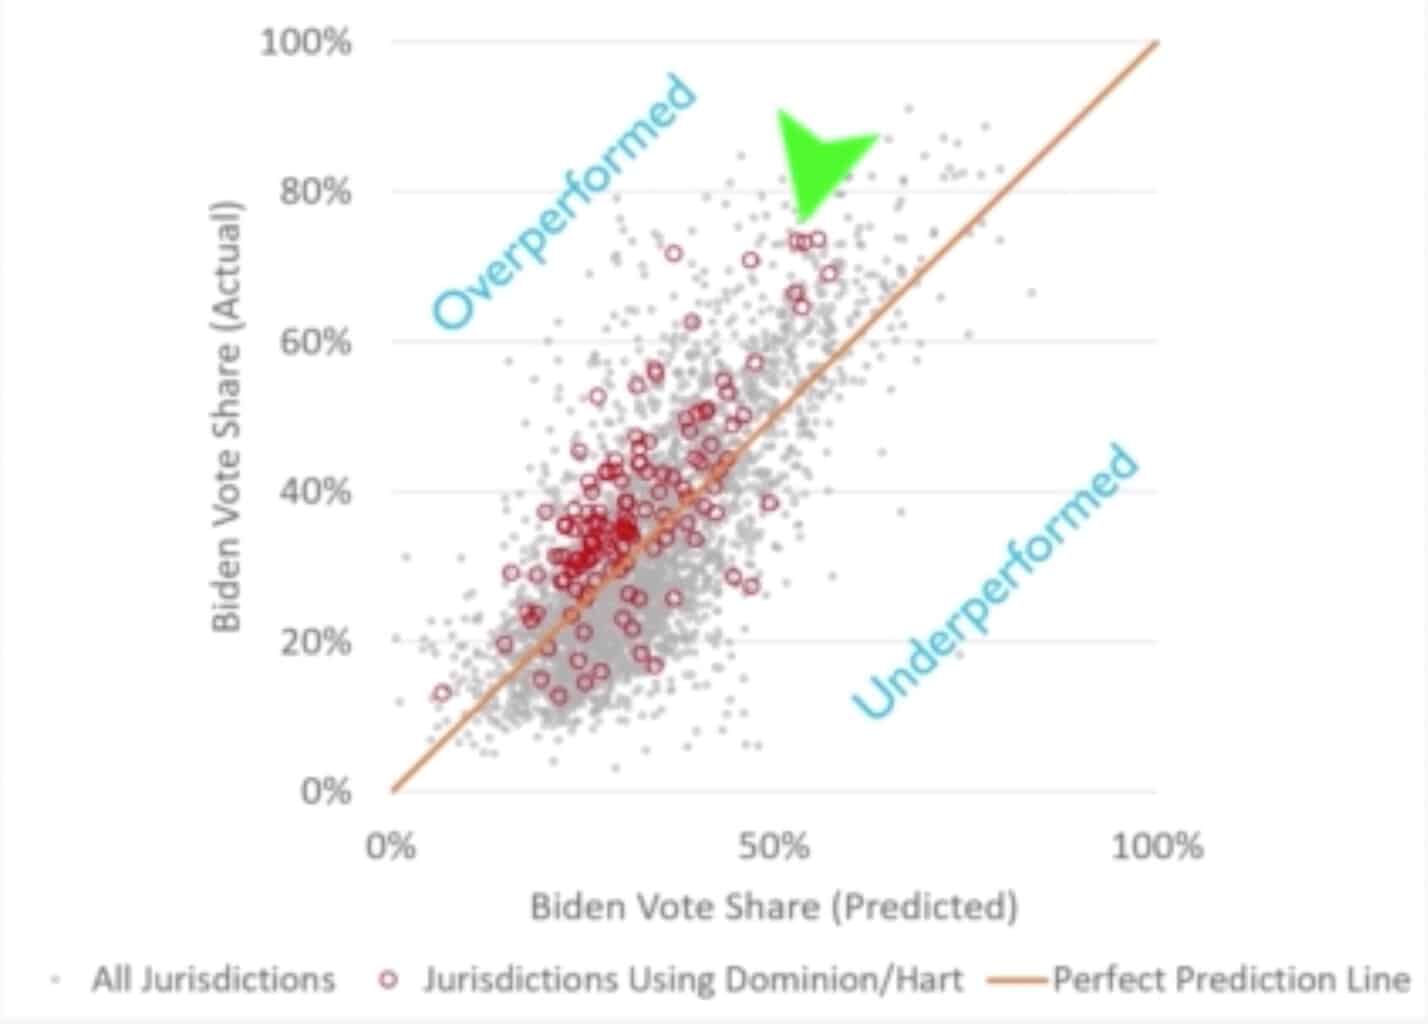 Joe Biden Appears to Outperform in Counties Using Dominion
or HART Voting Machines: Data Analyst 1